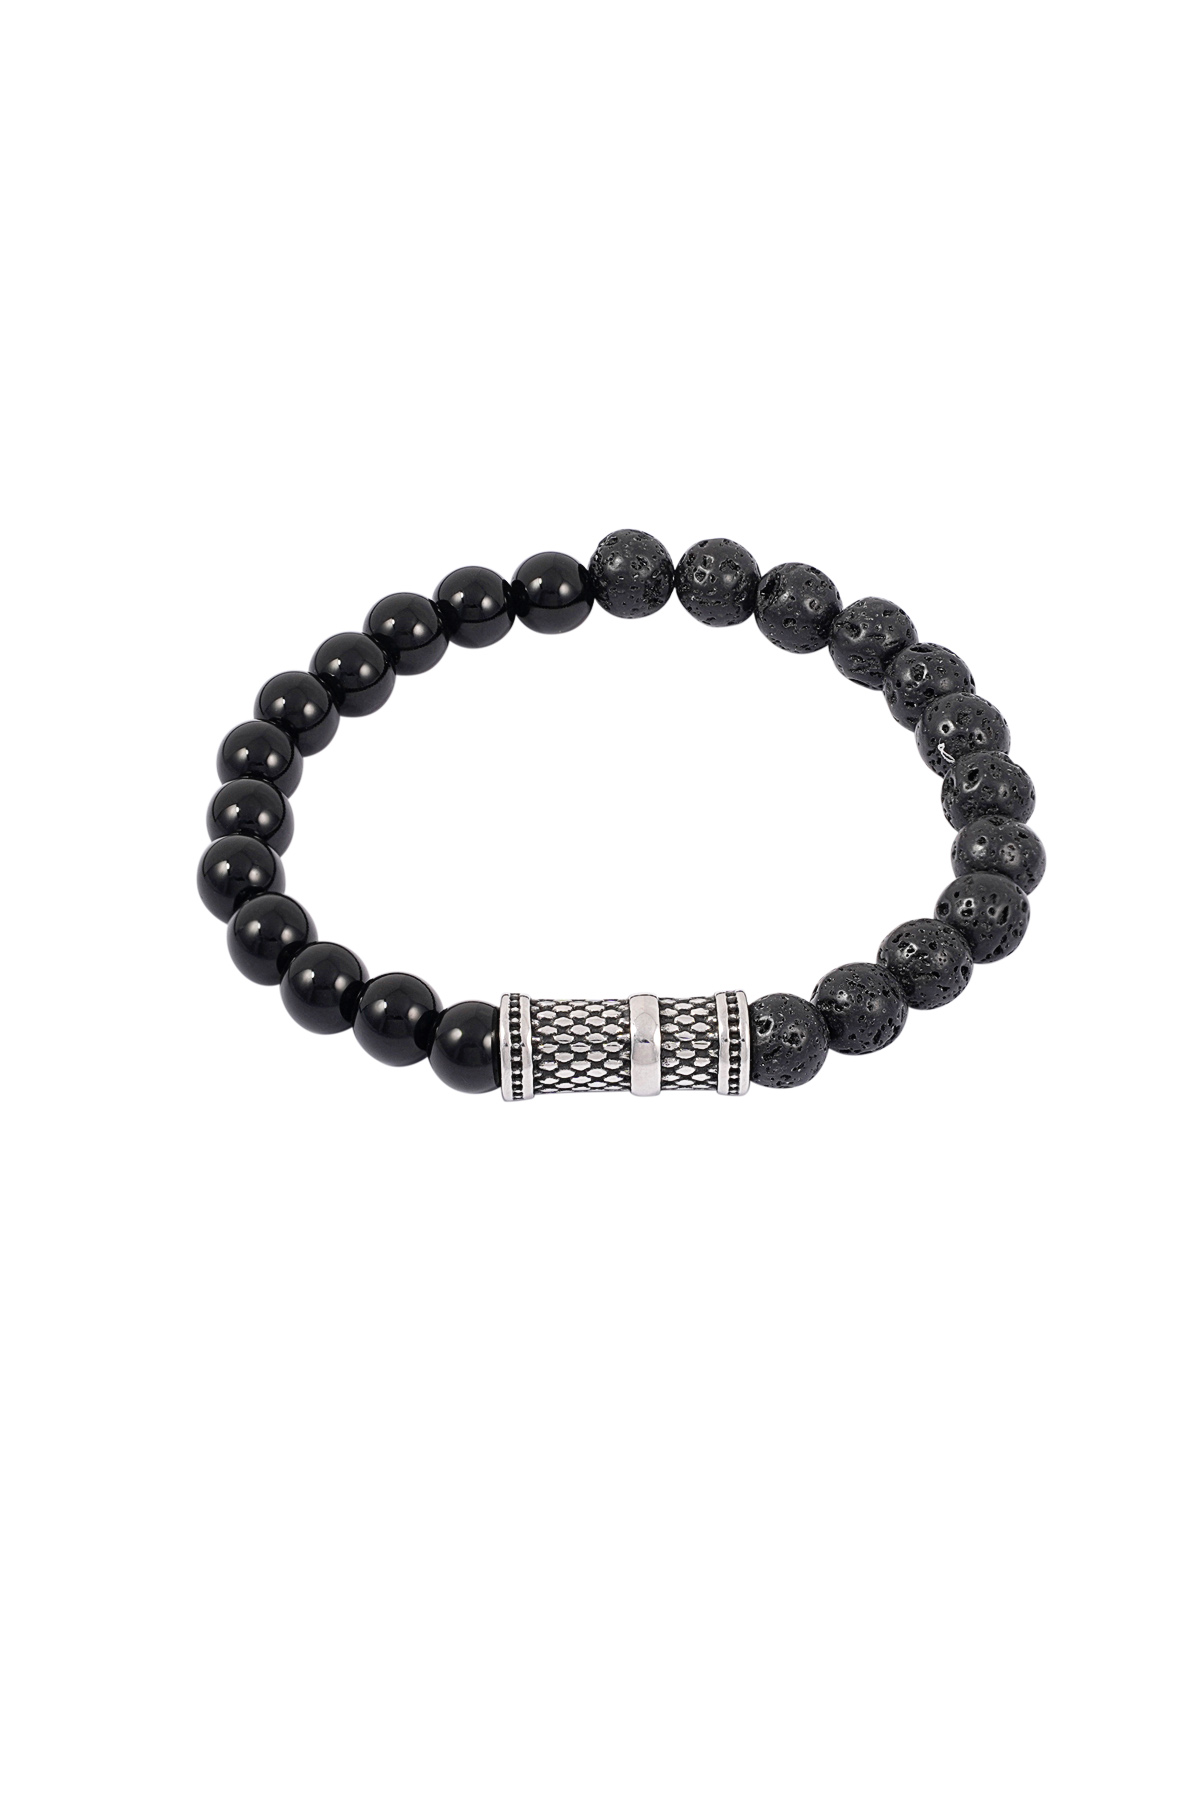 Cool men's bracelet with beads - black/silver 